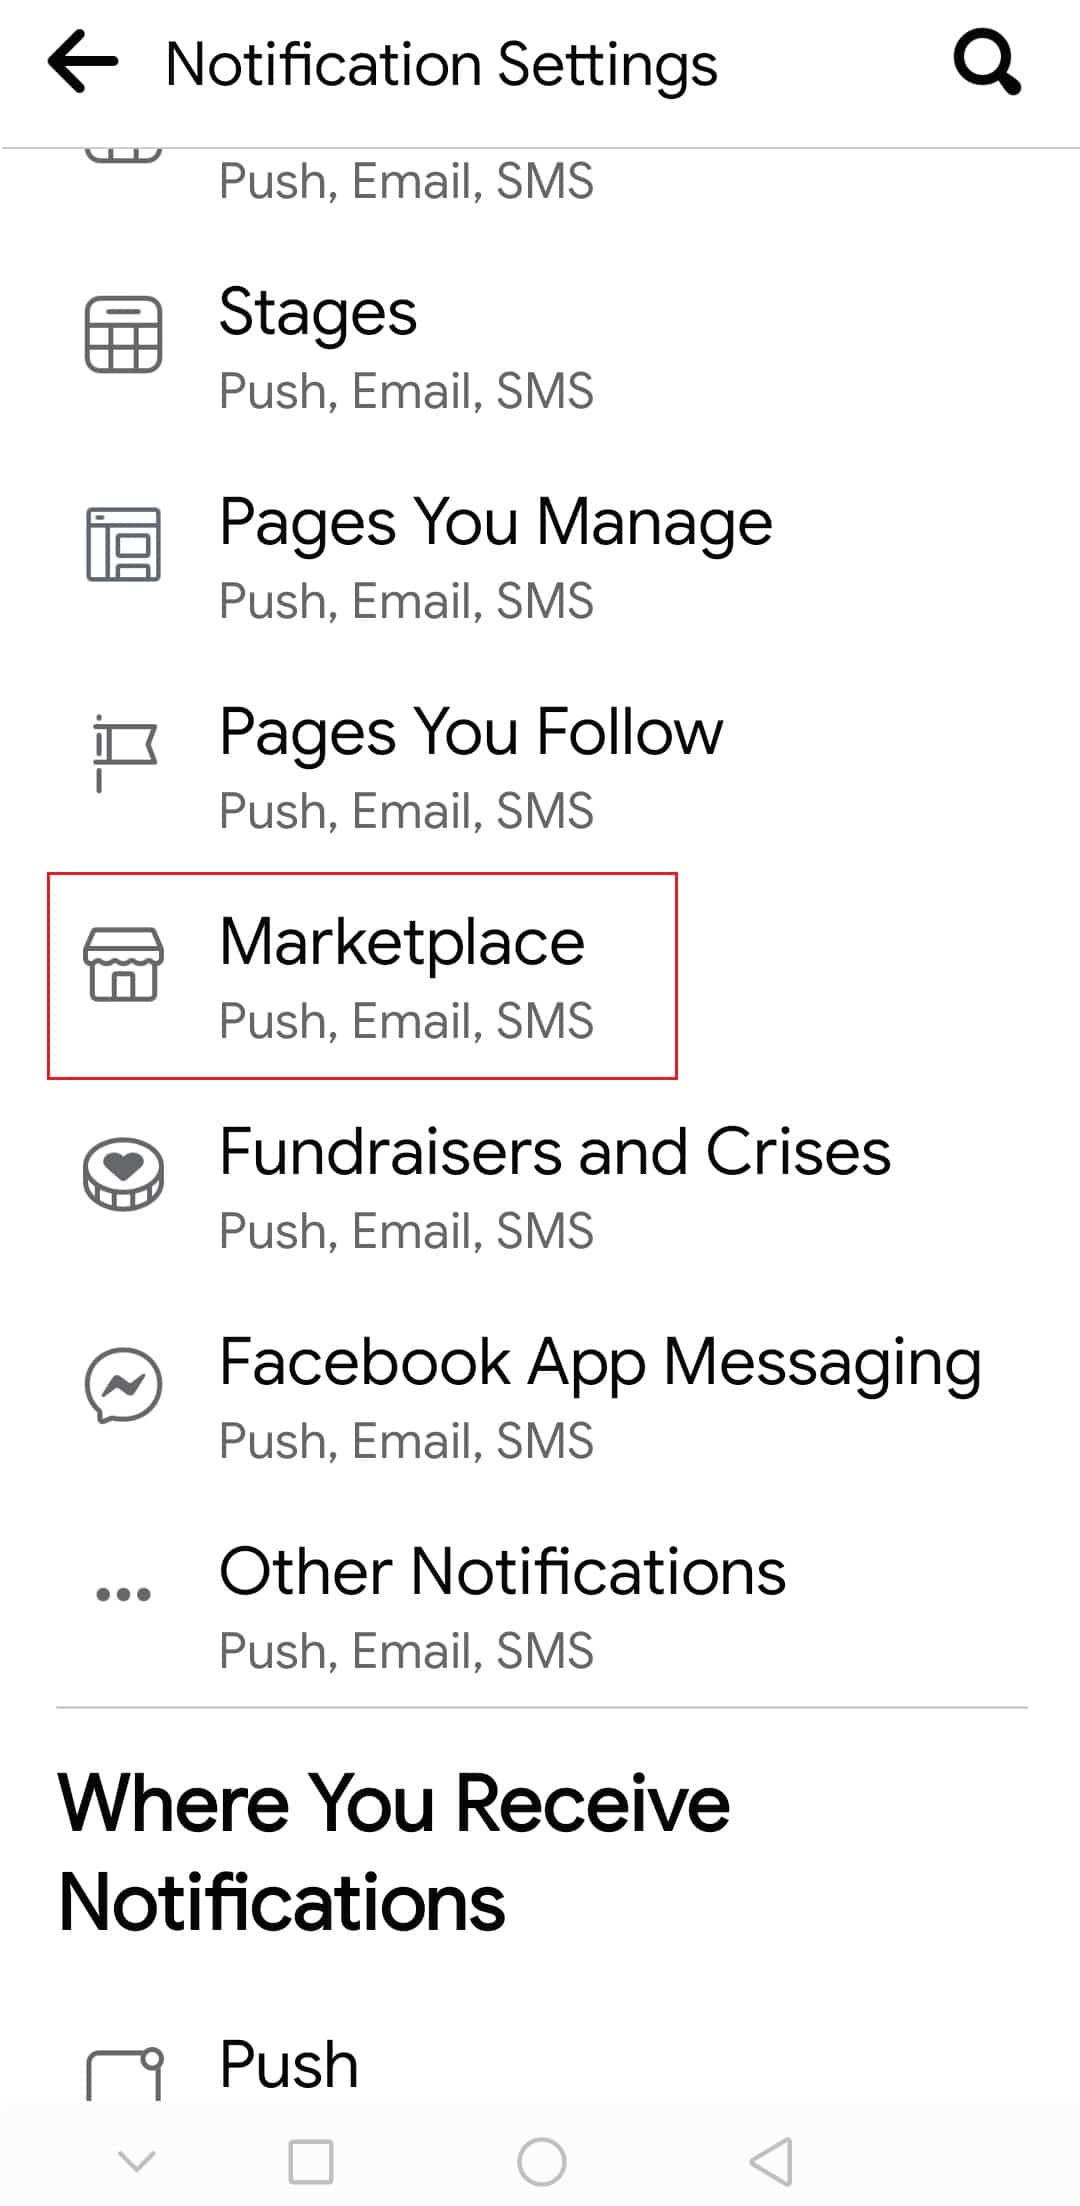 tap on Marketplace option in Notification settings on Facebook Android app